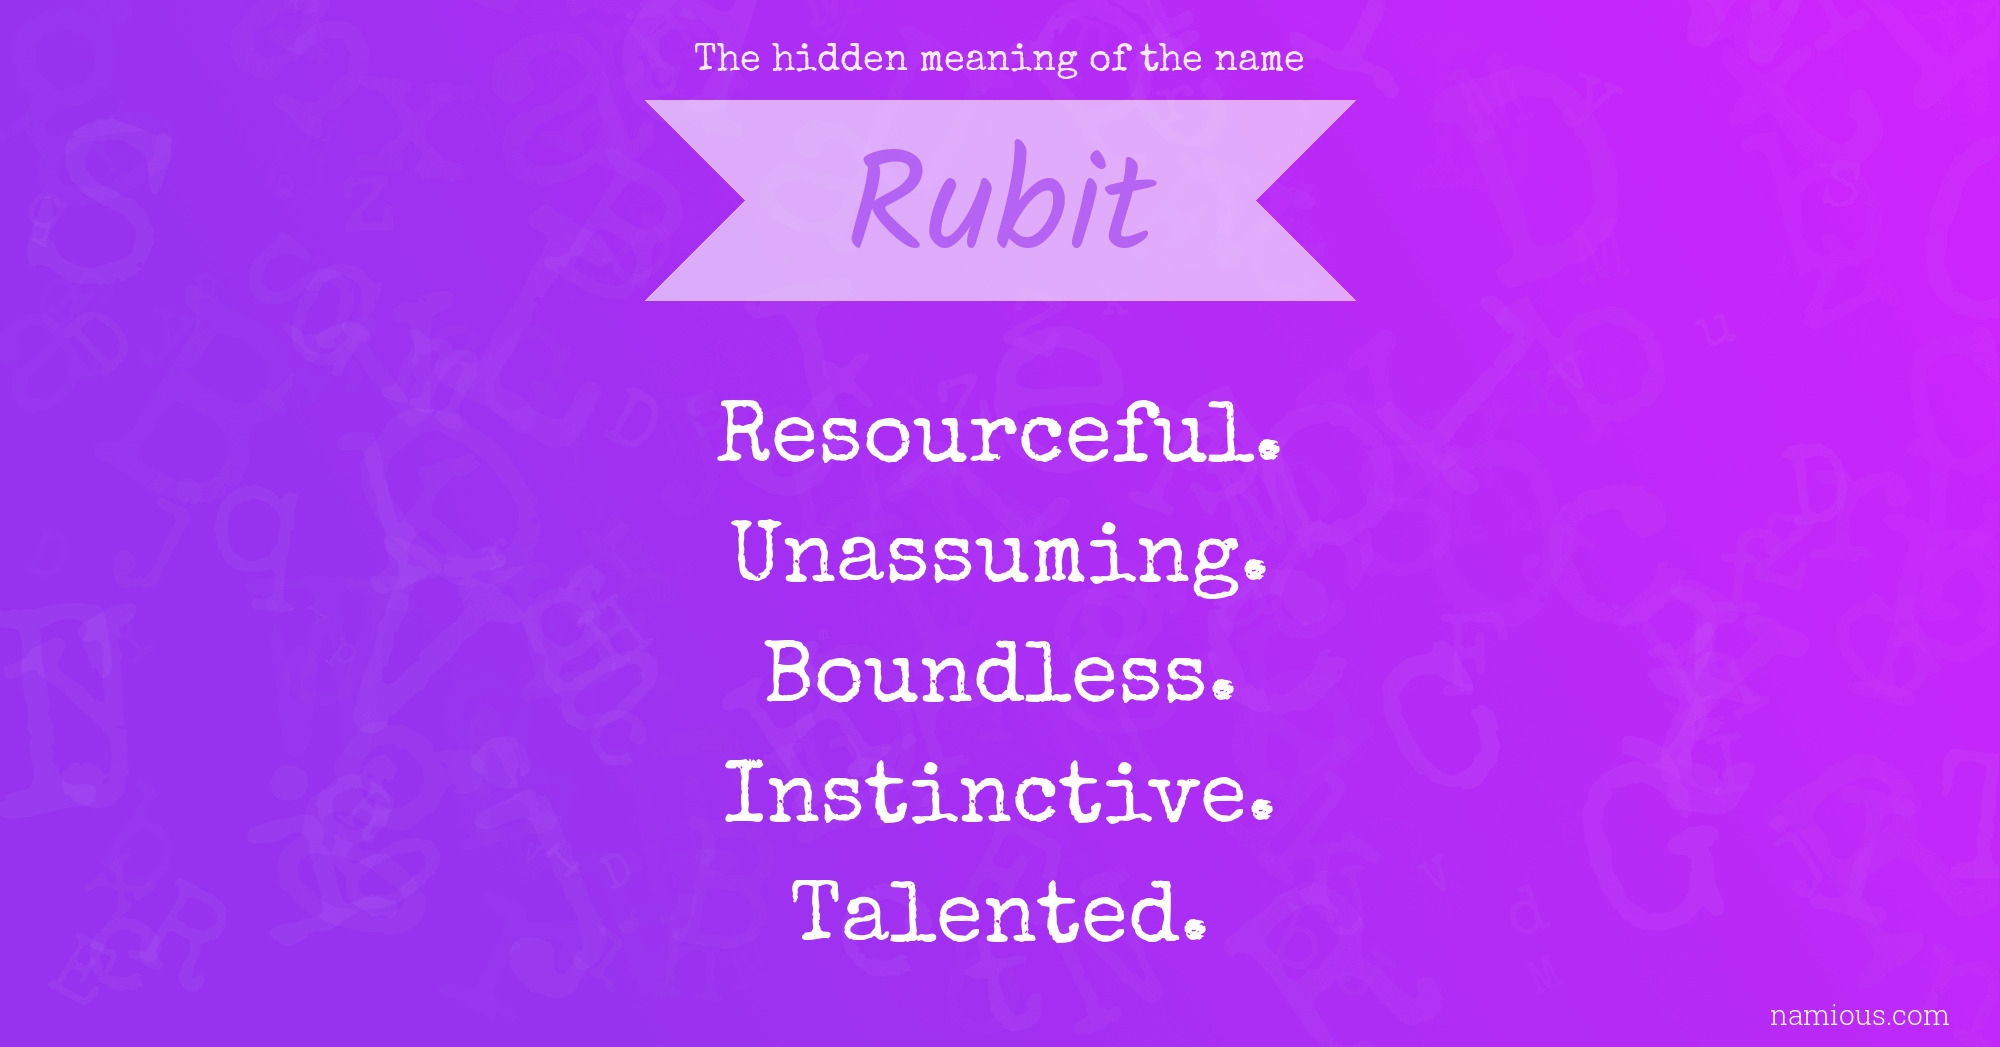 The hidden meaning of the name Rubit